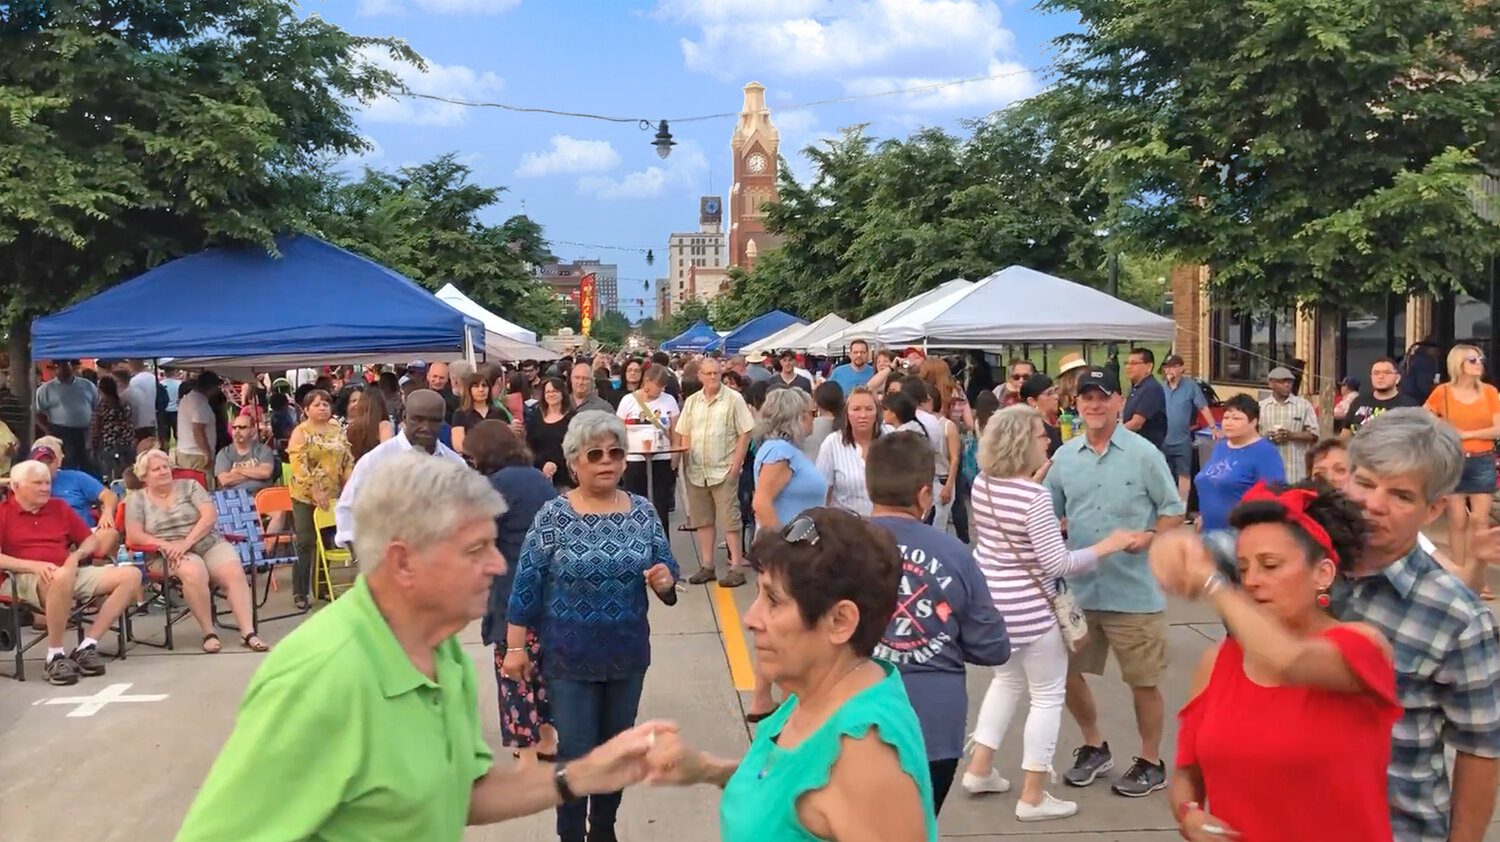 Mercado Returns To Moline Tonight With Fun, Food, Music And More